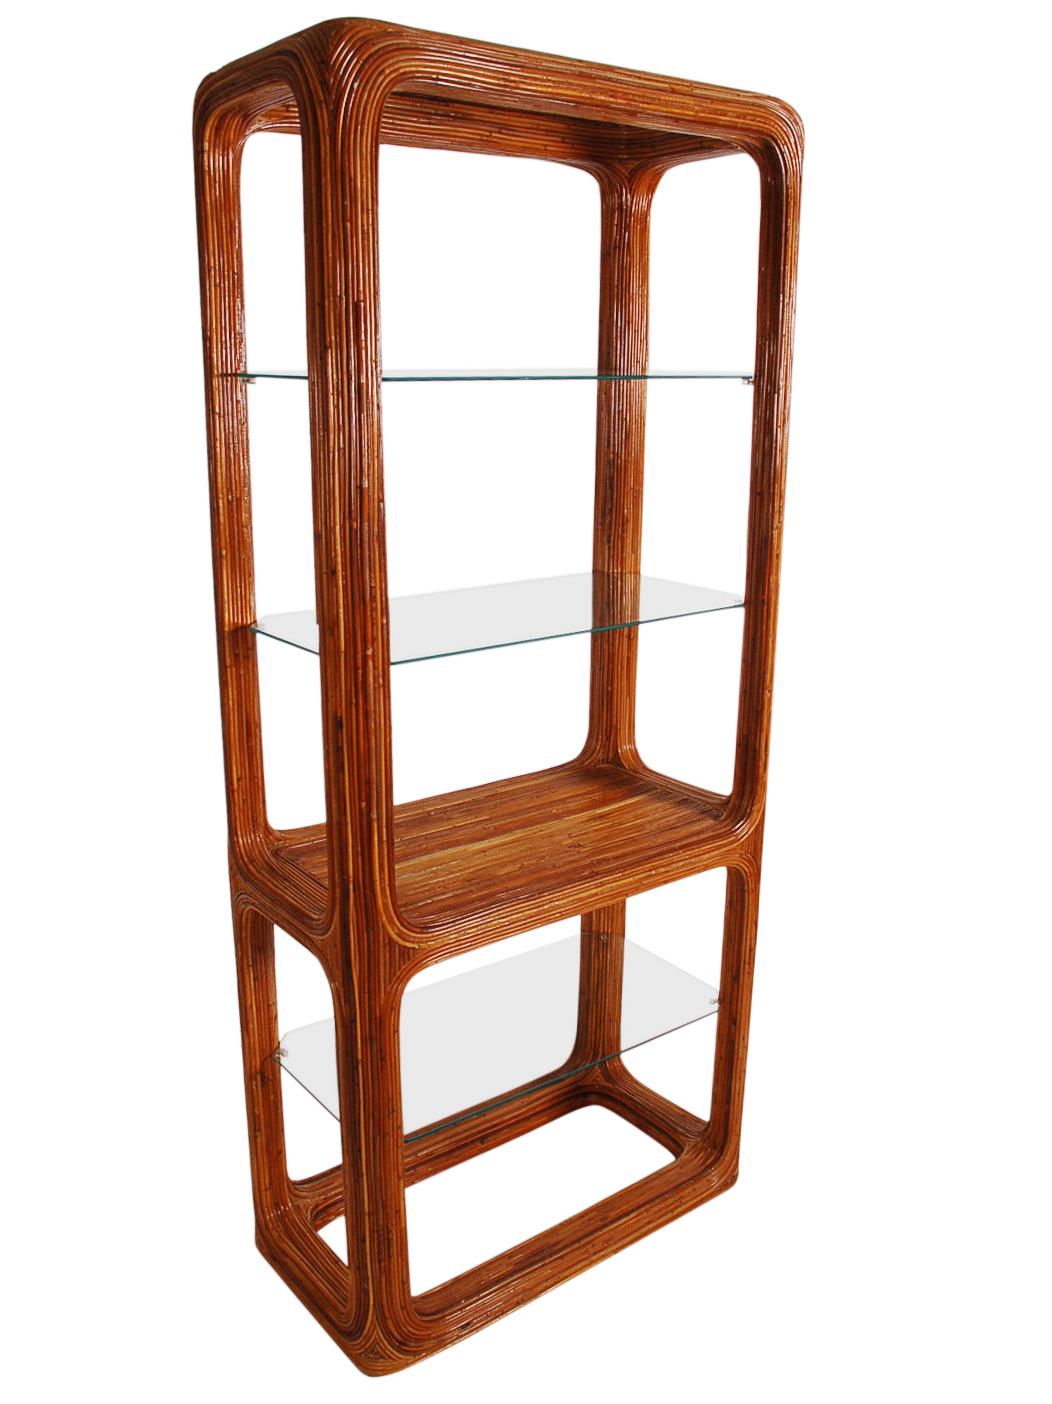 A sculptural matching pair of étagères. These feature wood and pencil reed frames with glass shelving. Well cared for through the years. Price includes the pair as shown.